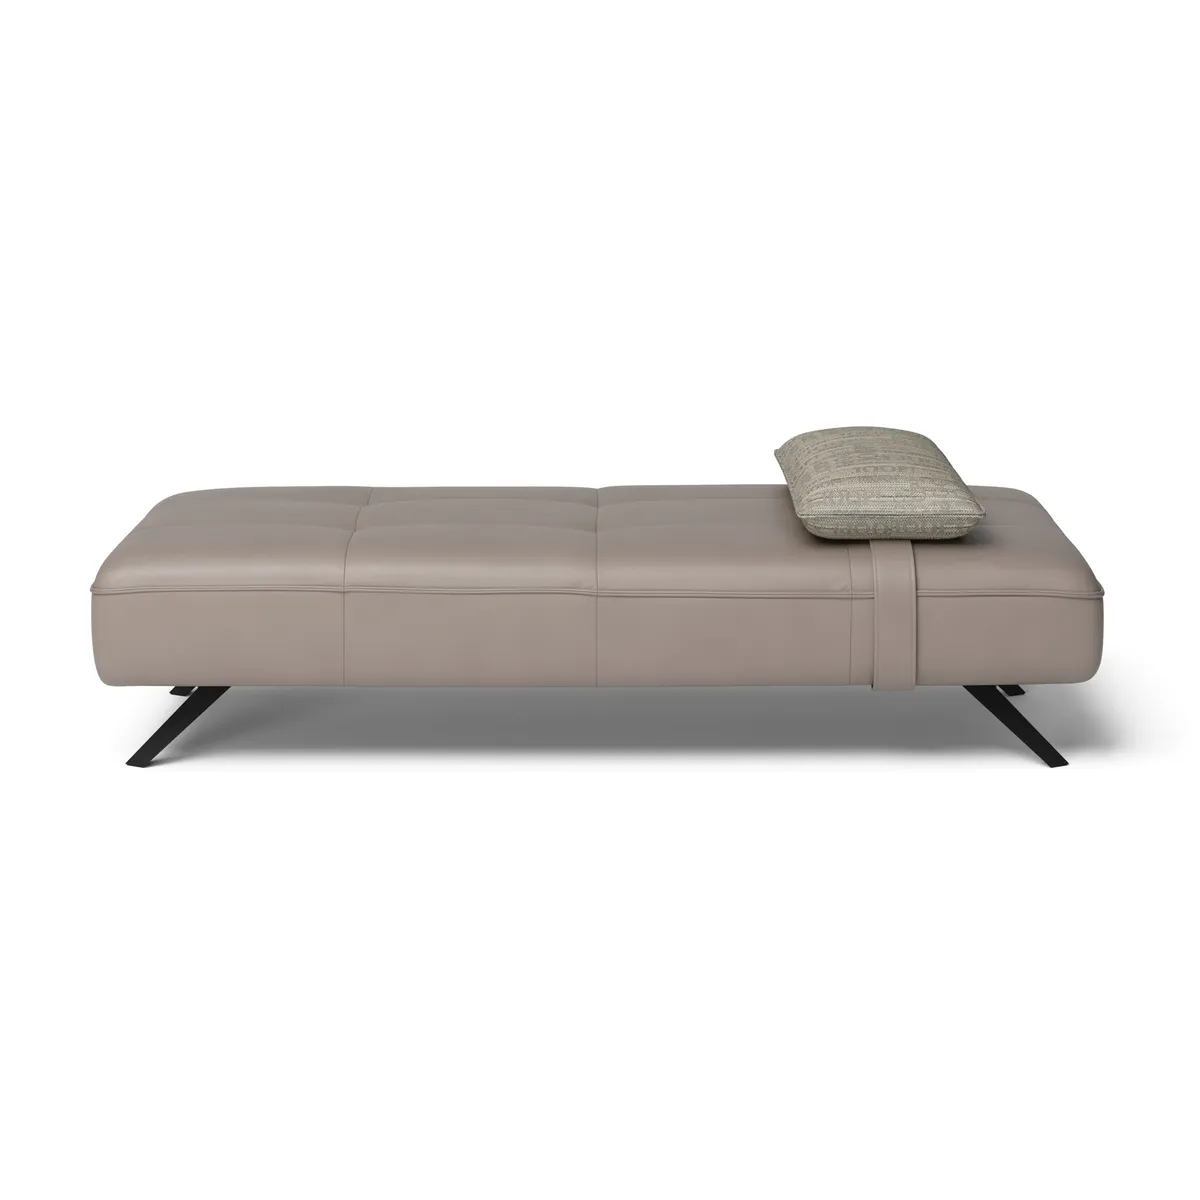 JOOP! SQUARE 8113 DAYBED